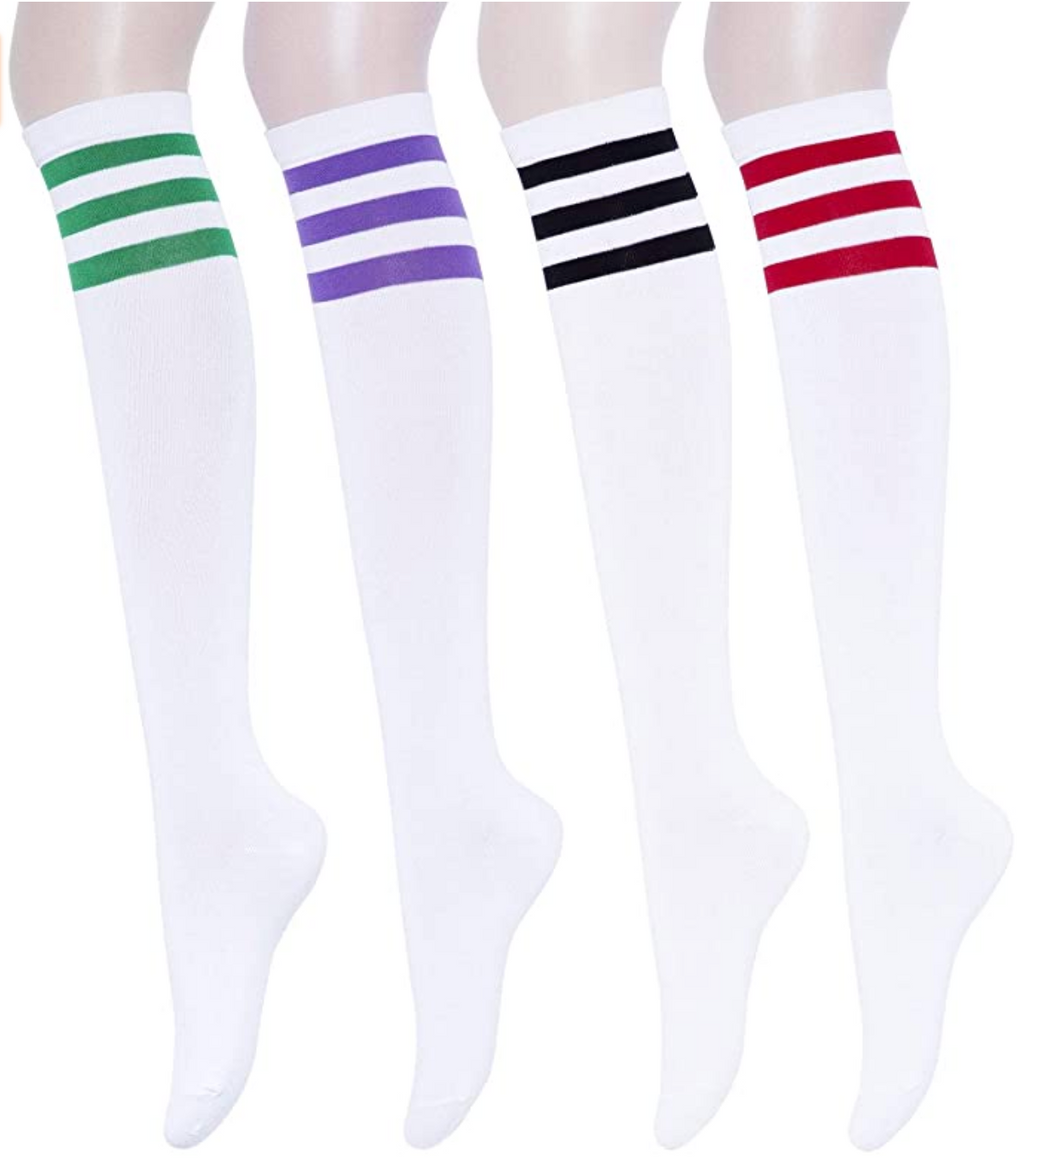 Striped Combed Cotton Non-Slipping Knee High Socks